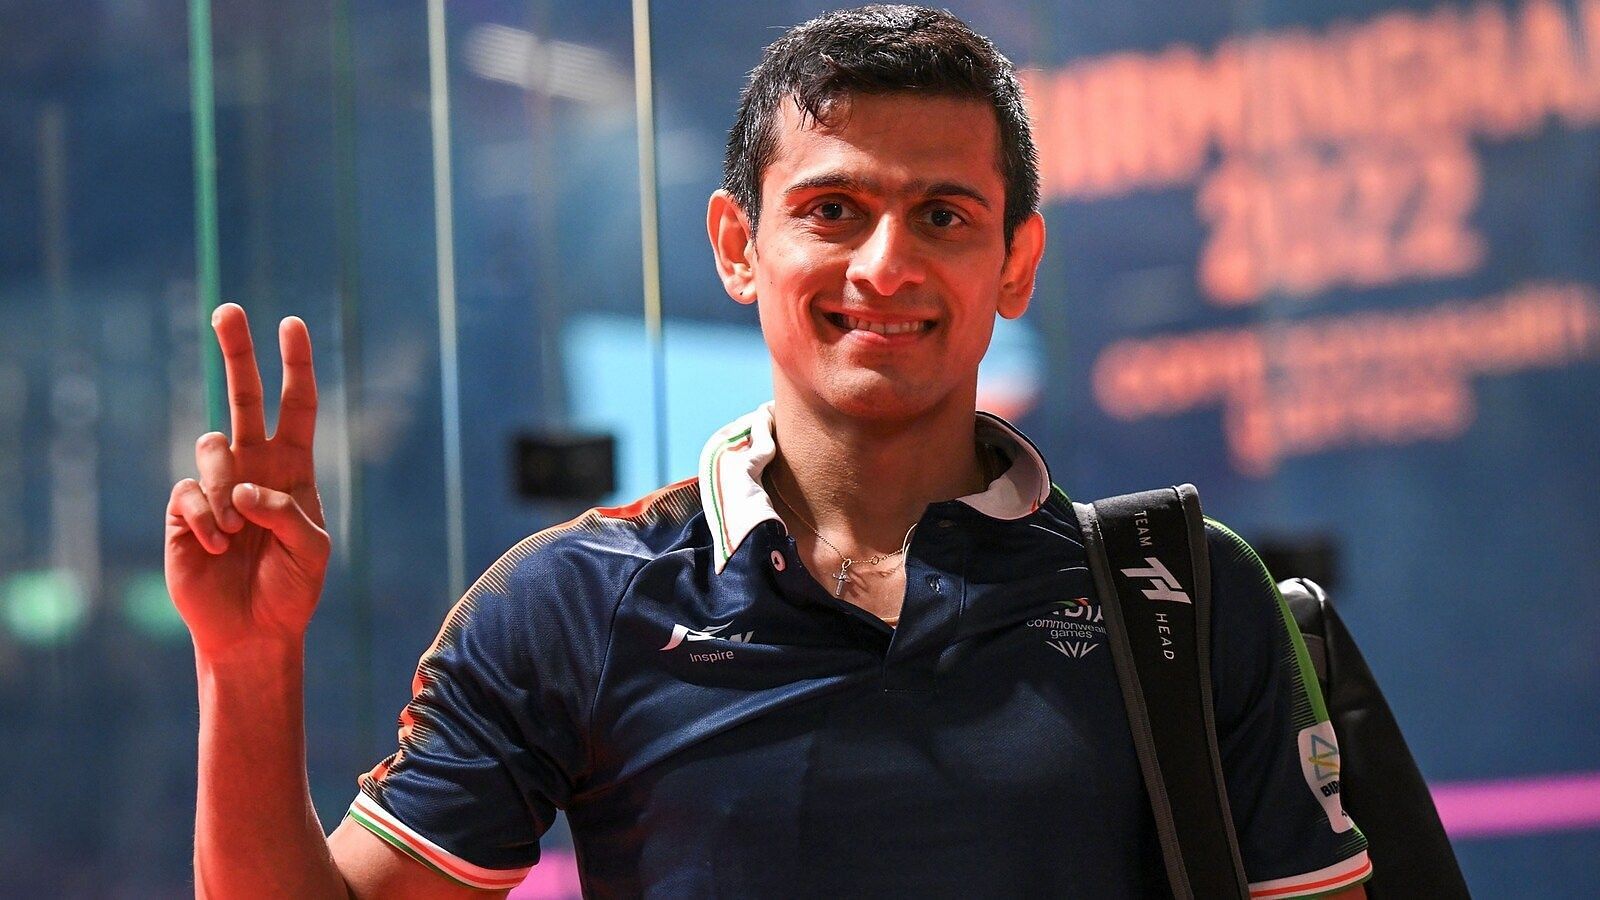 37-year old Saurav Ghoshal is considering the chances of him making the 2028 Olympics 